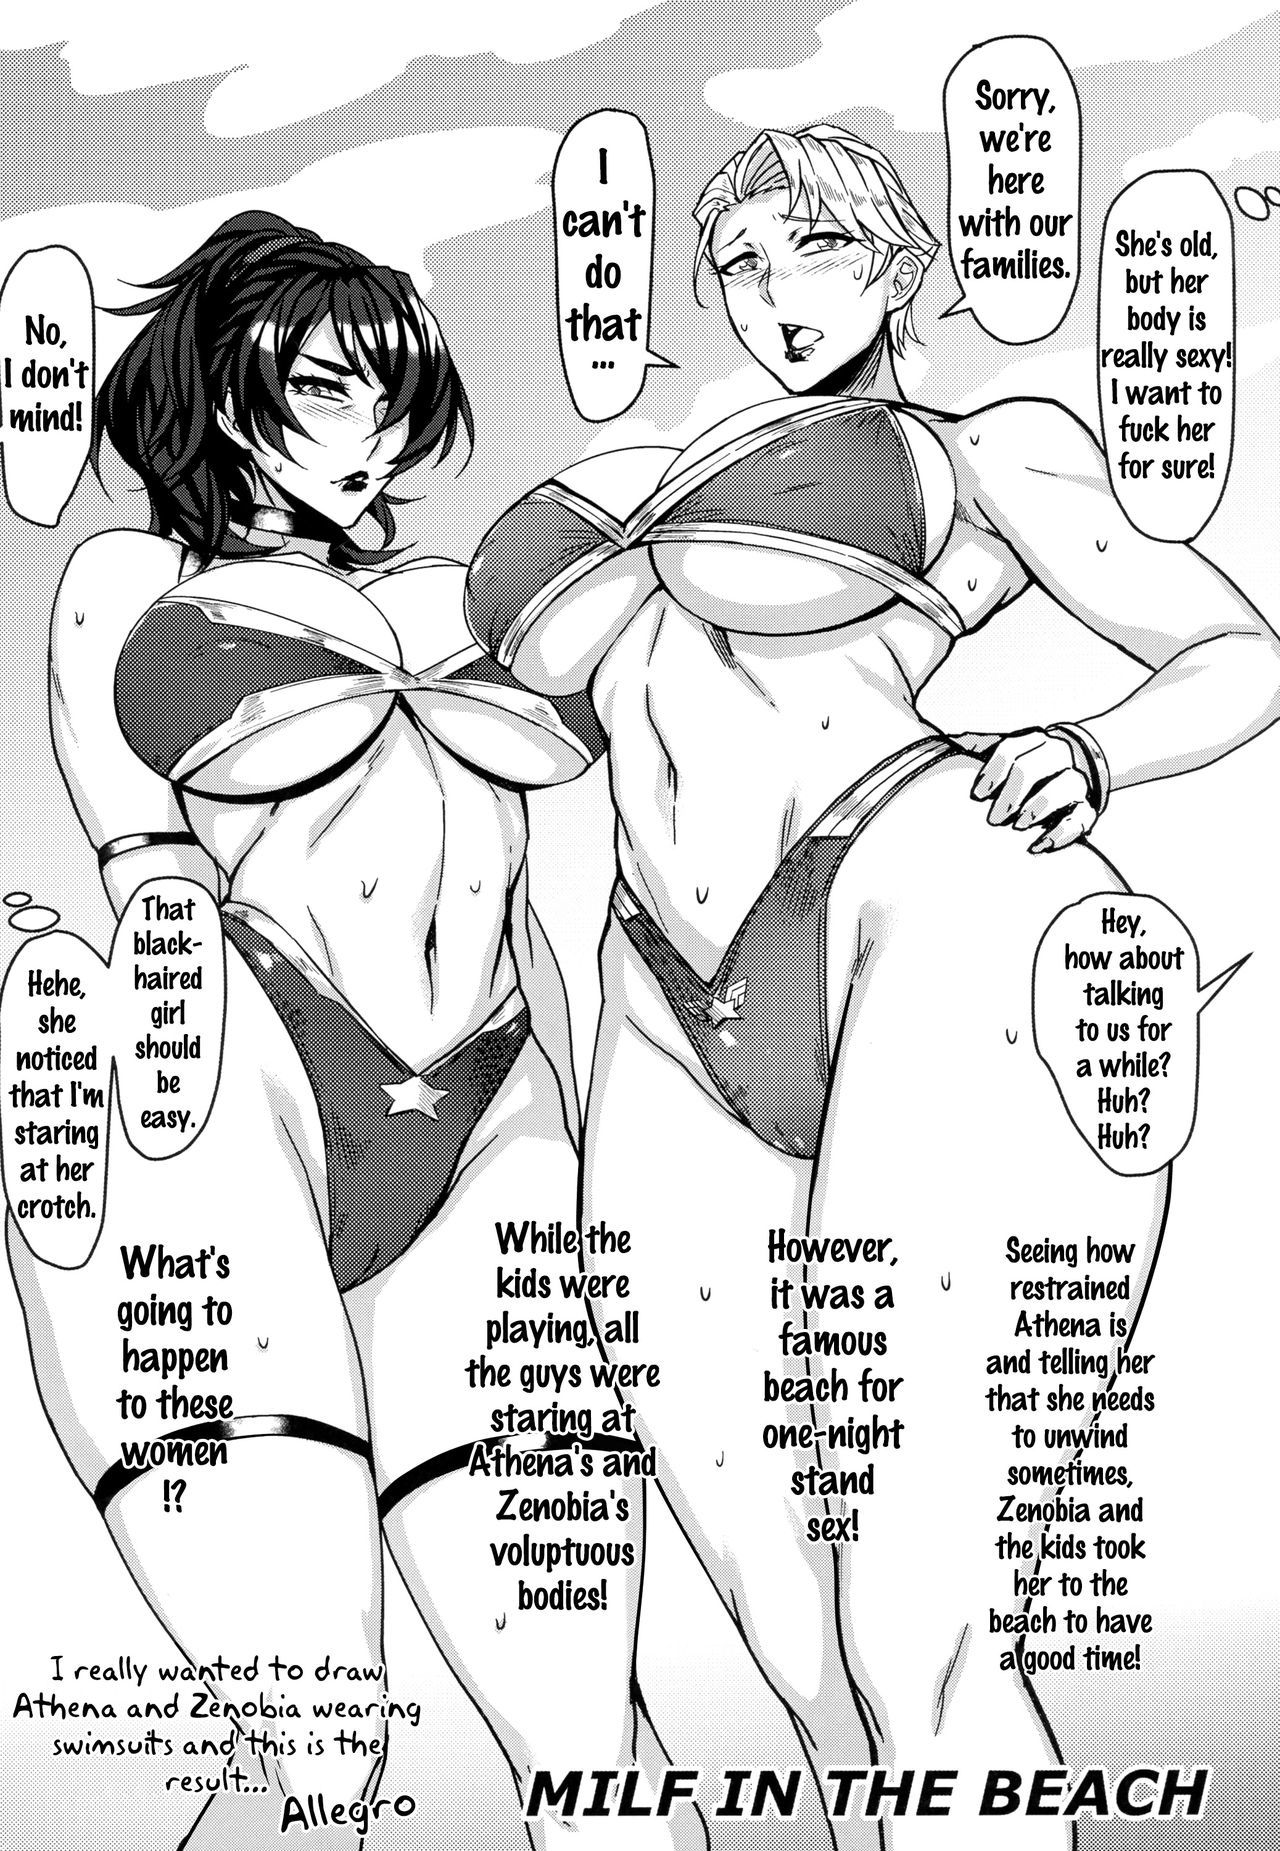 MILF of STEEL FOREVER {doujins.com} - Hentai.name